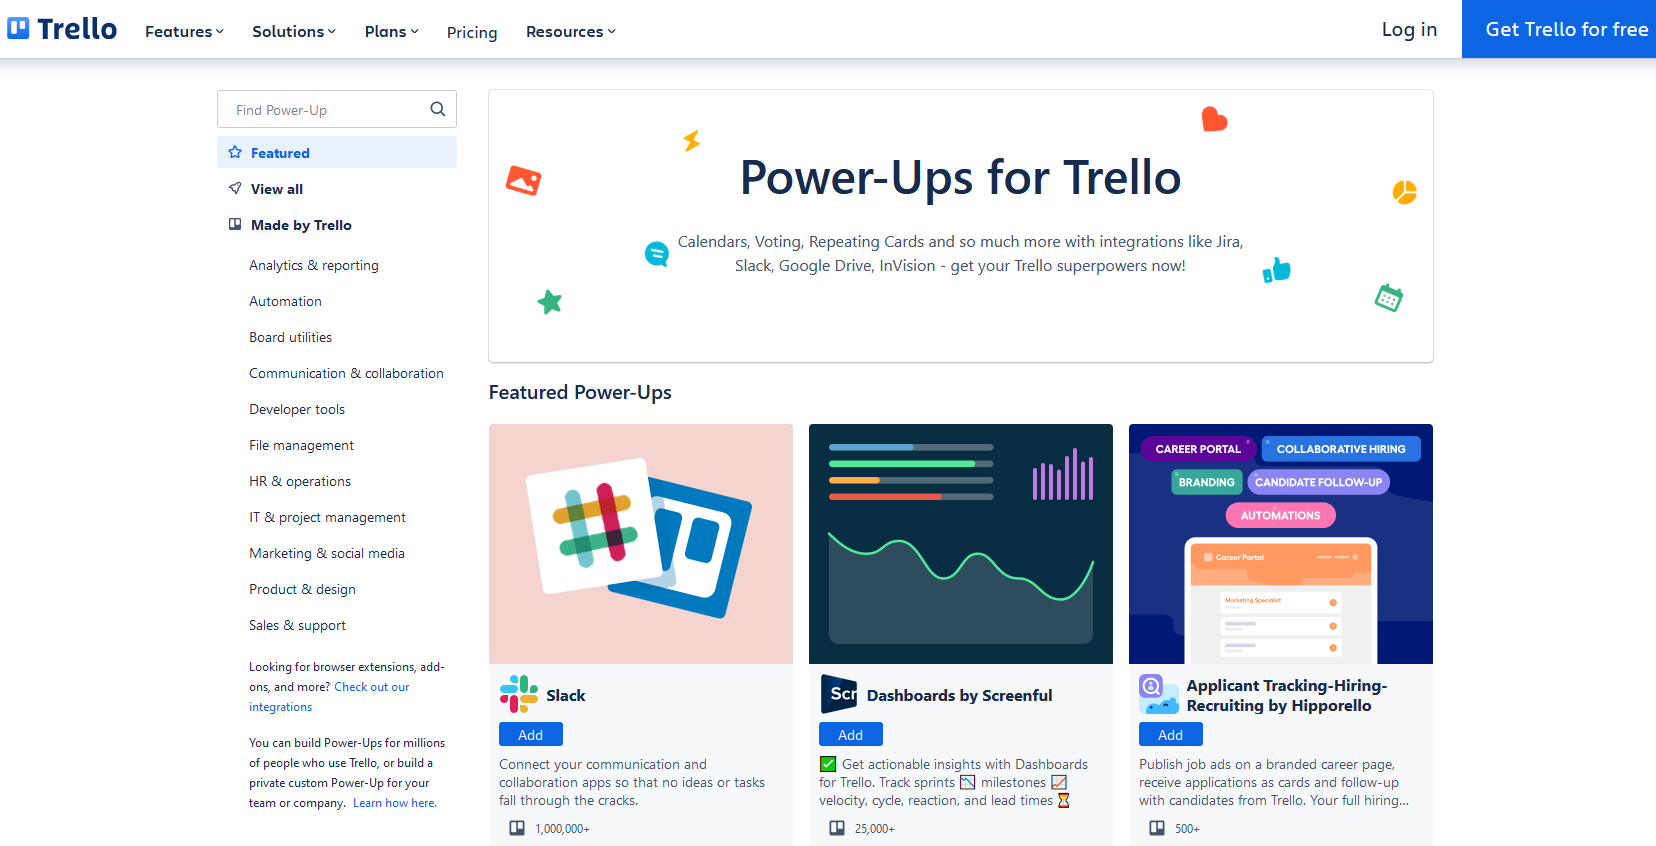 A screenshot of the power-up marketplace Trello offers.